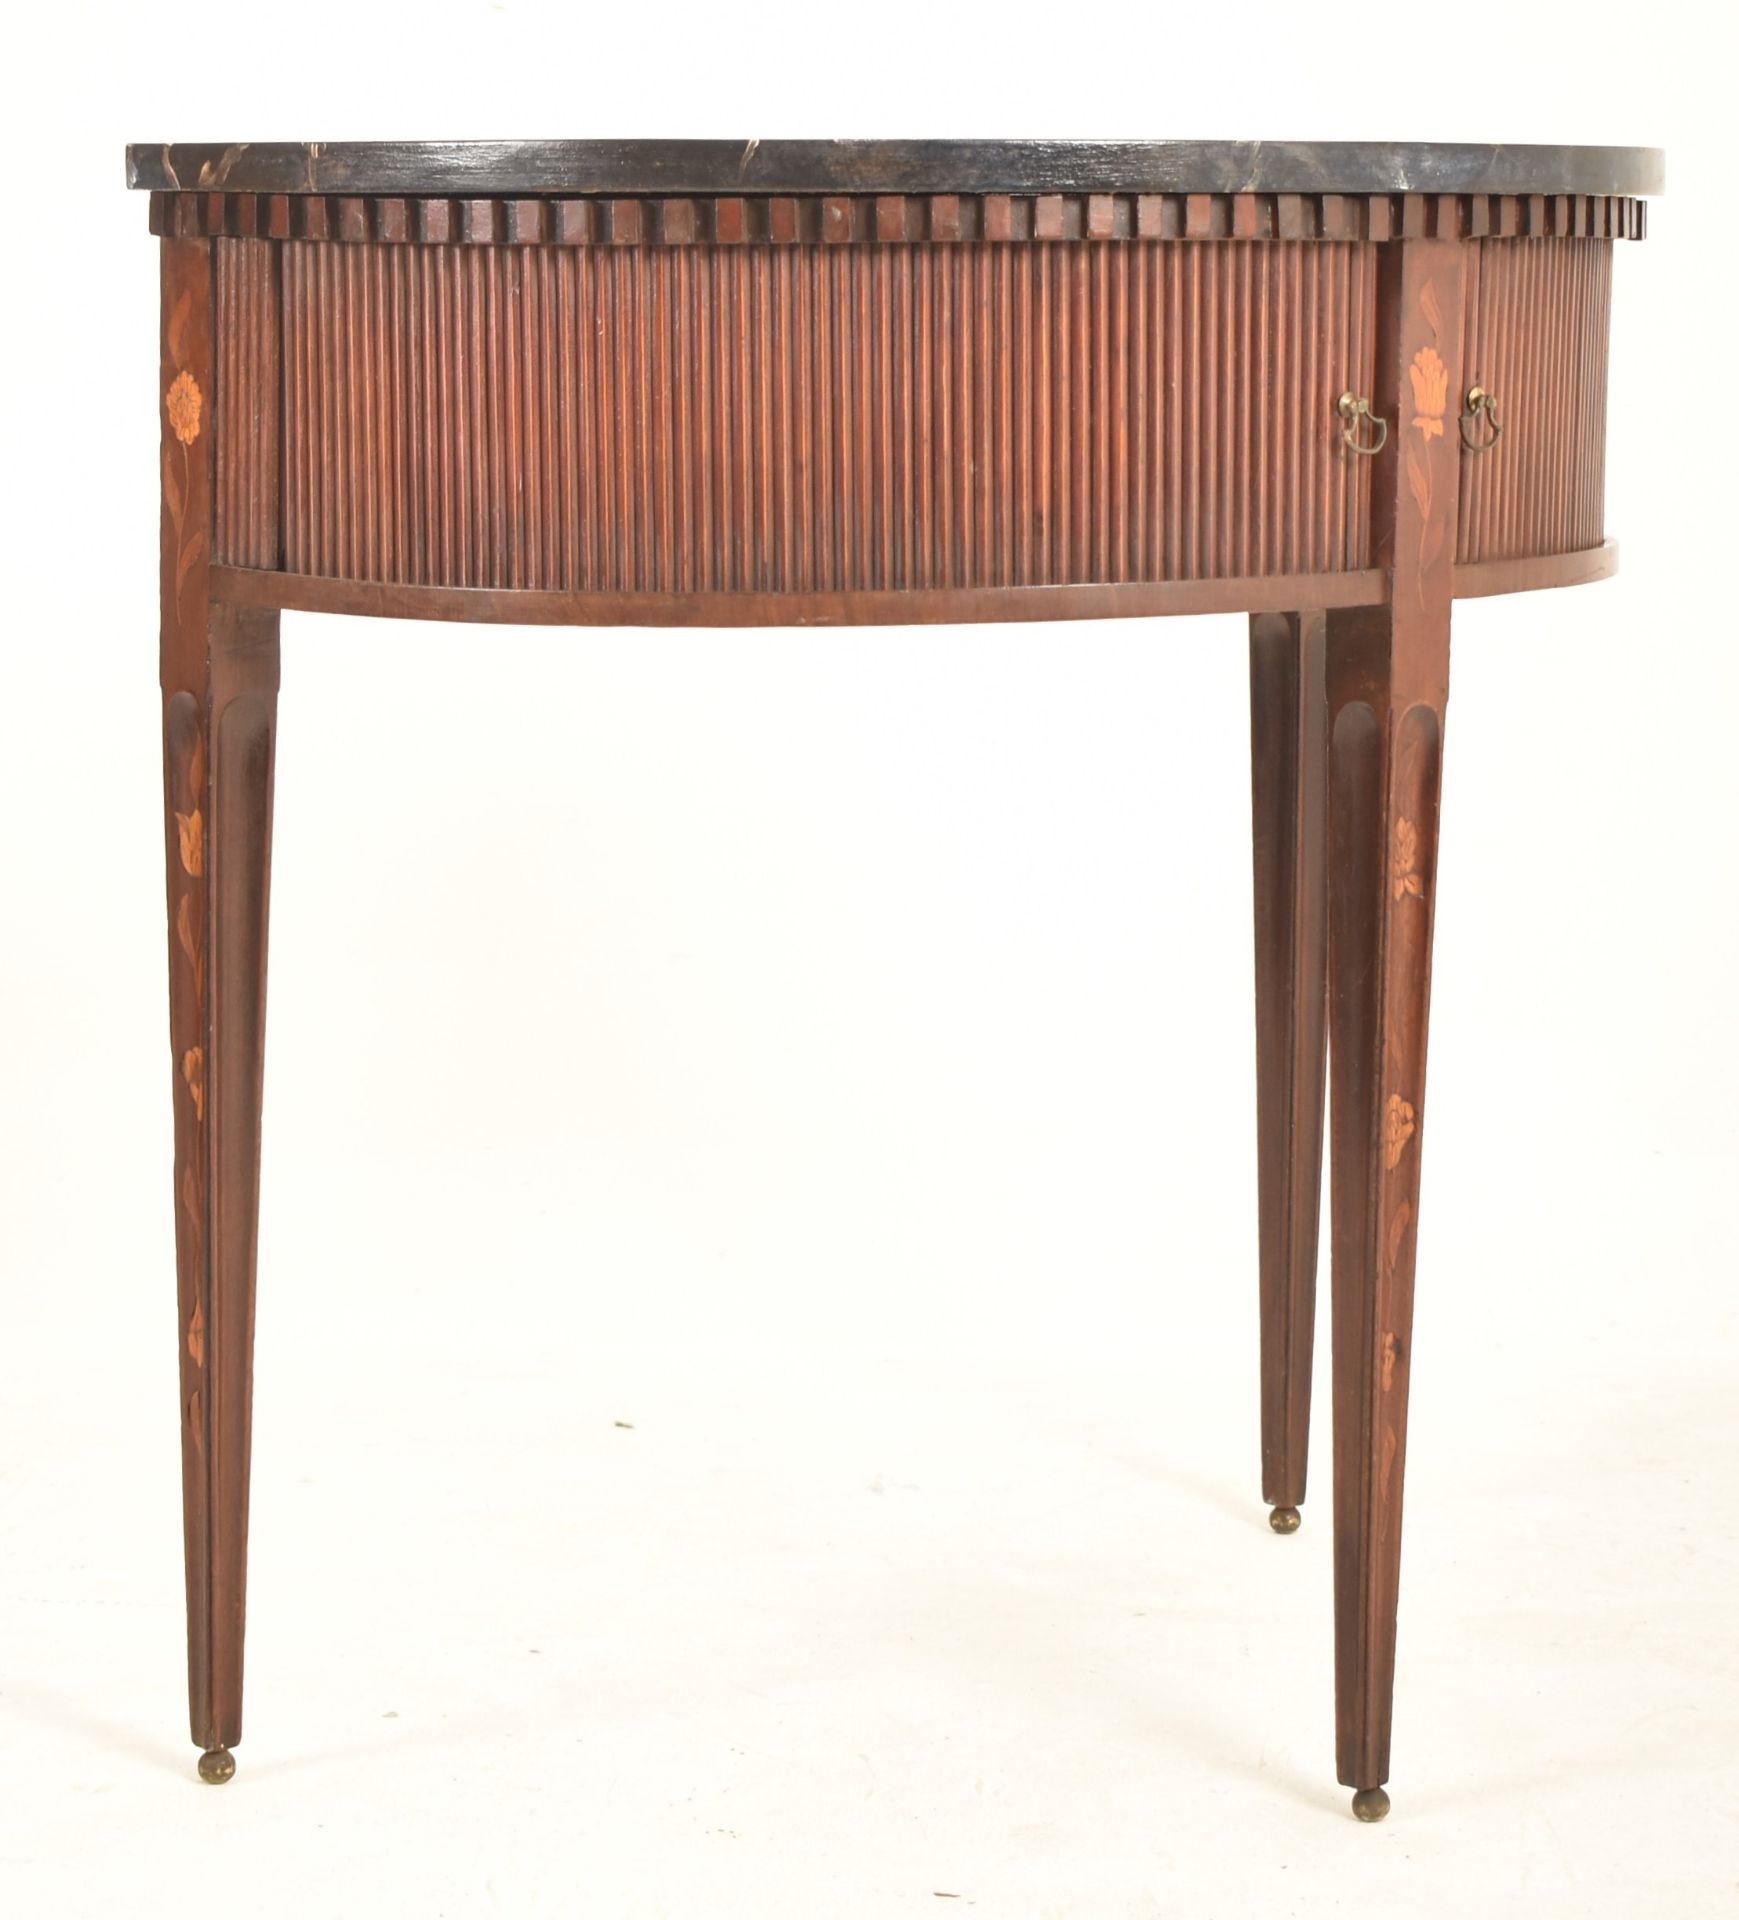 19TH CENTURY DUTCH MARQUETRY INLAID DEMI LUNE INLAID TABLE - Image 2 of 8